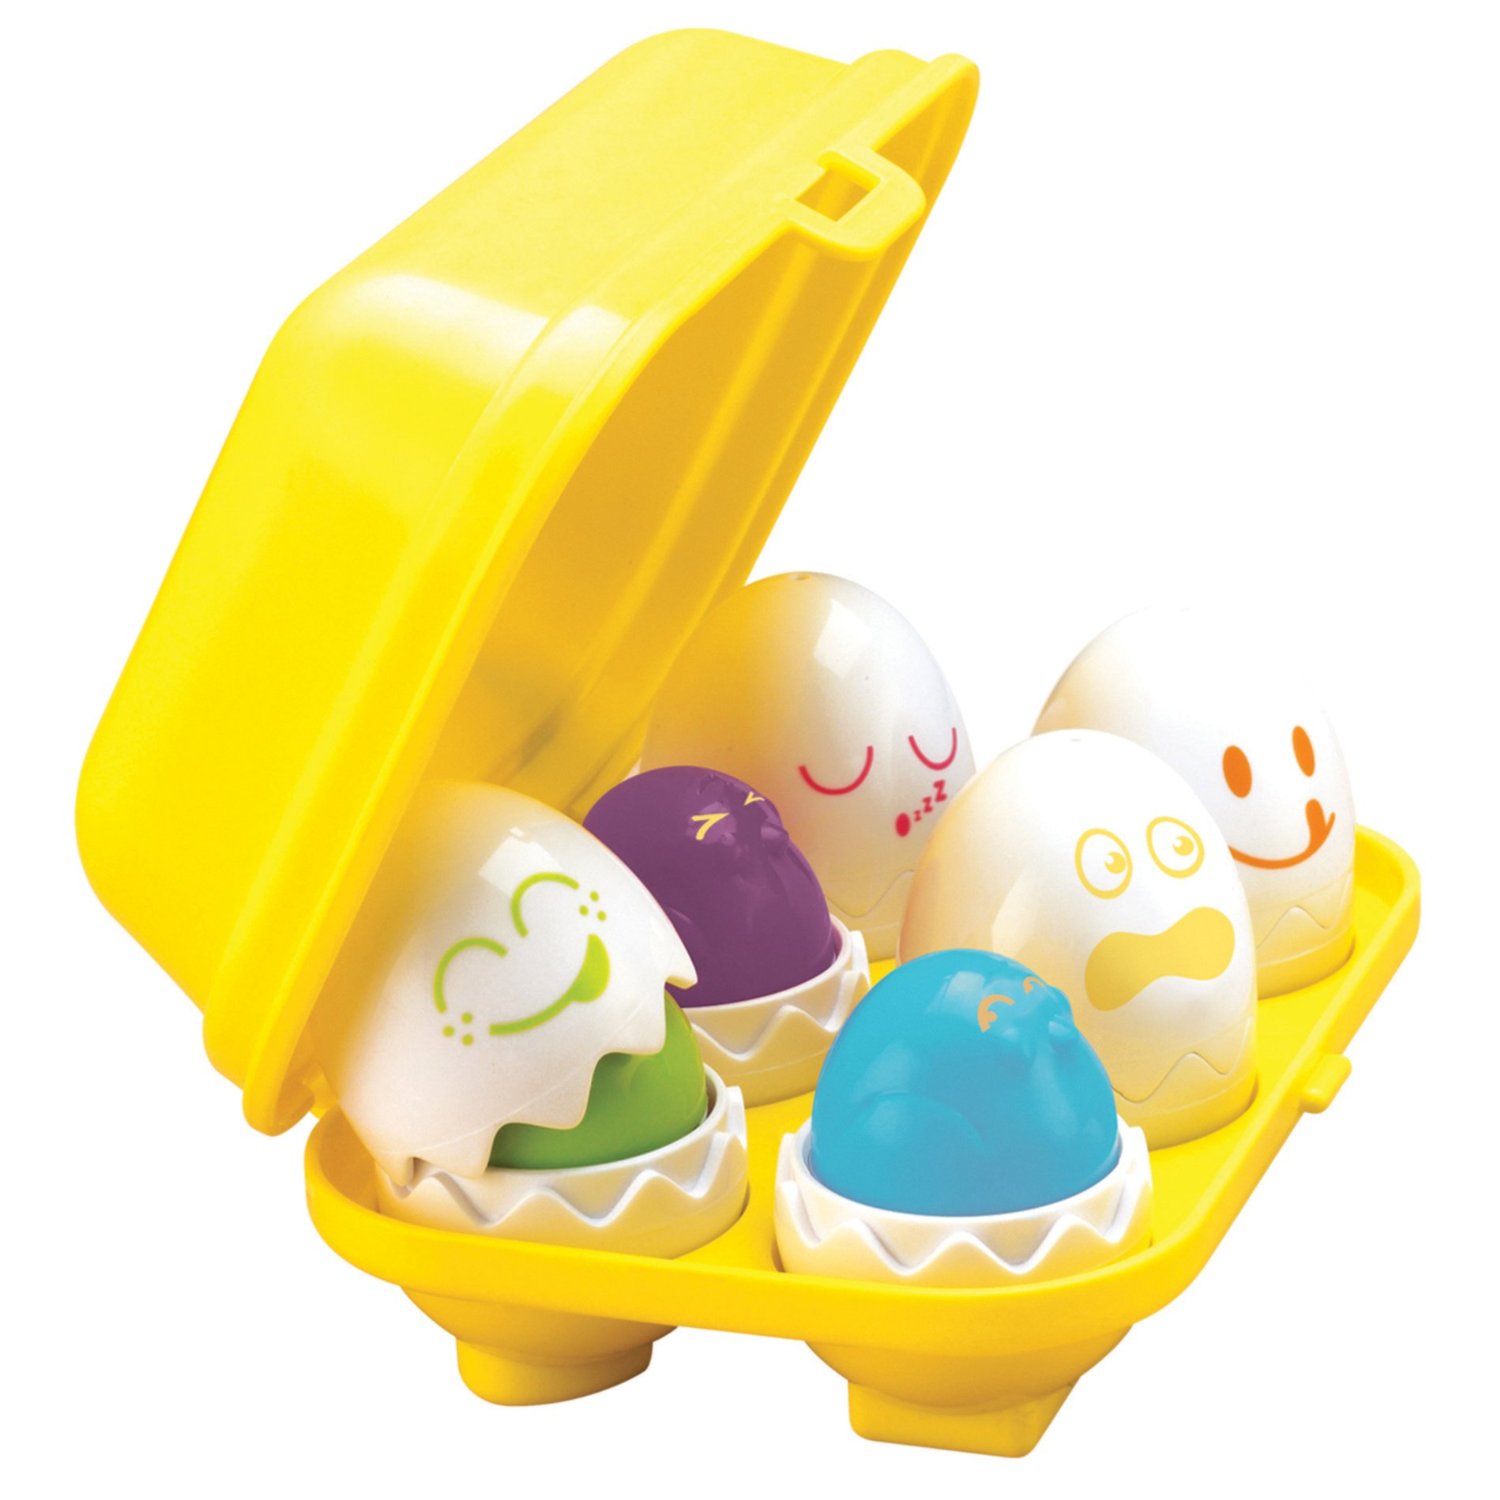 Tomy $500 Toy Prize Package Sweepstakes + Lil Chirpers Sorting Eggs set